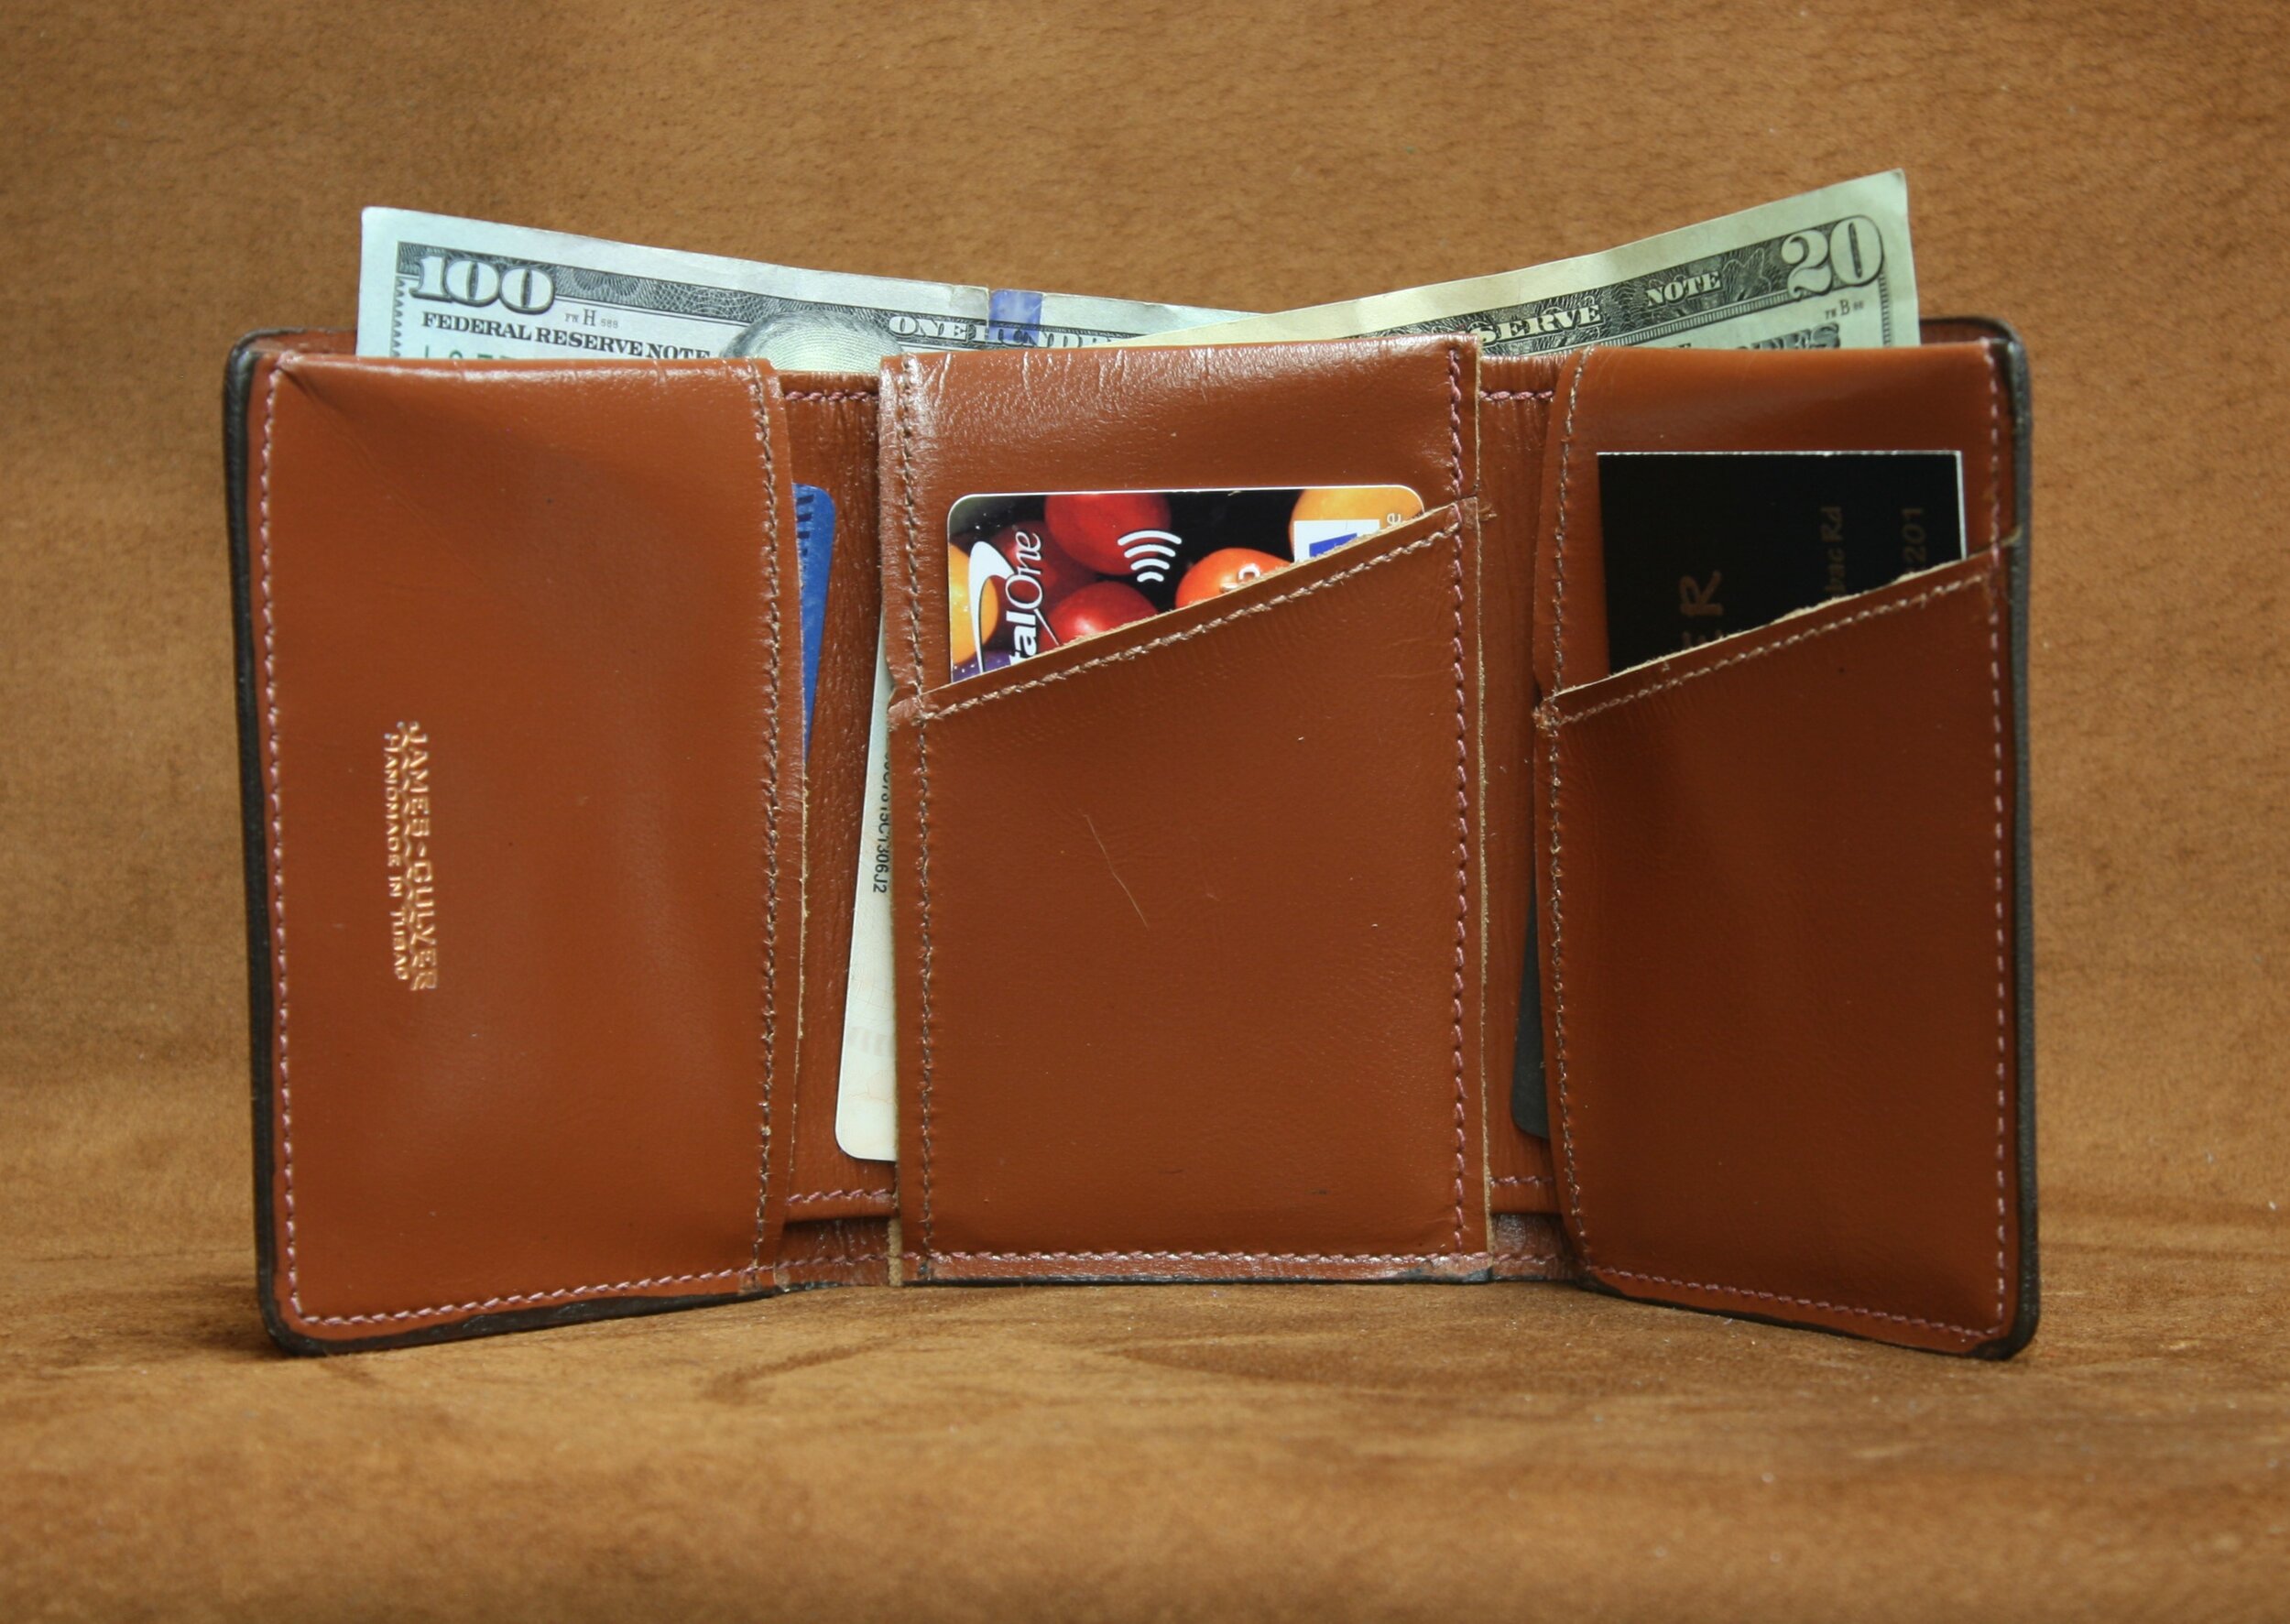 Trifold w/ divider